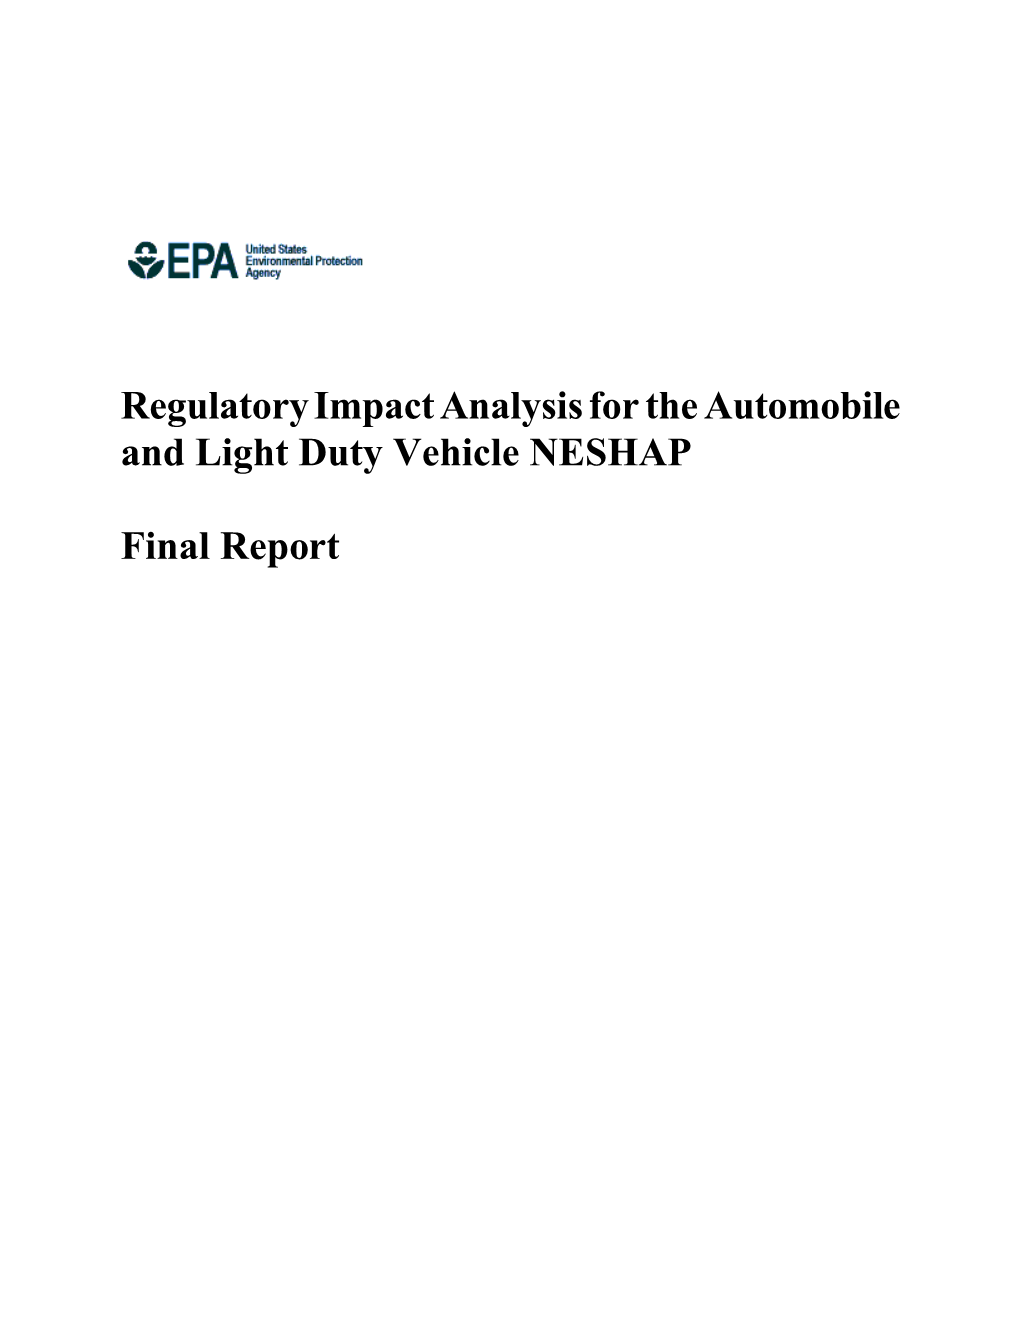 Regulatory Impact Analysis for the Automobile and Light Duty Vehicle NESHAP